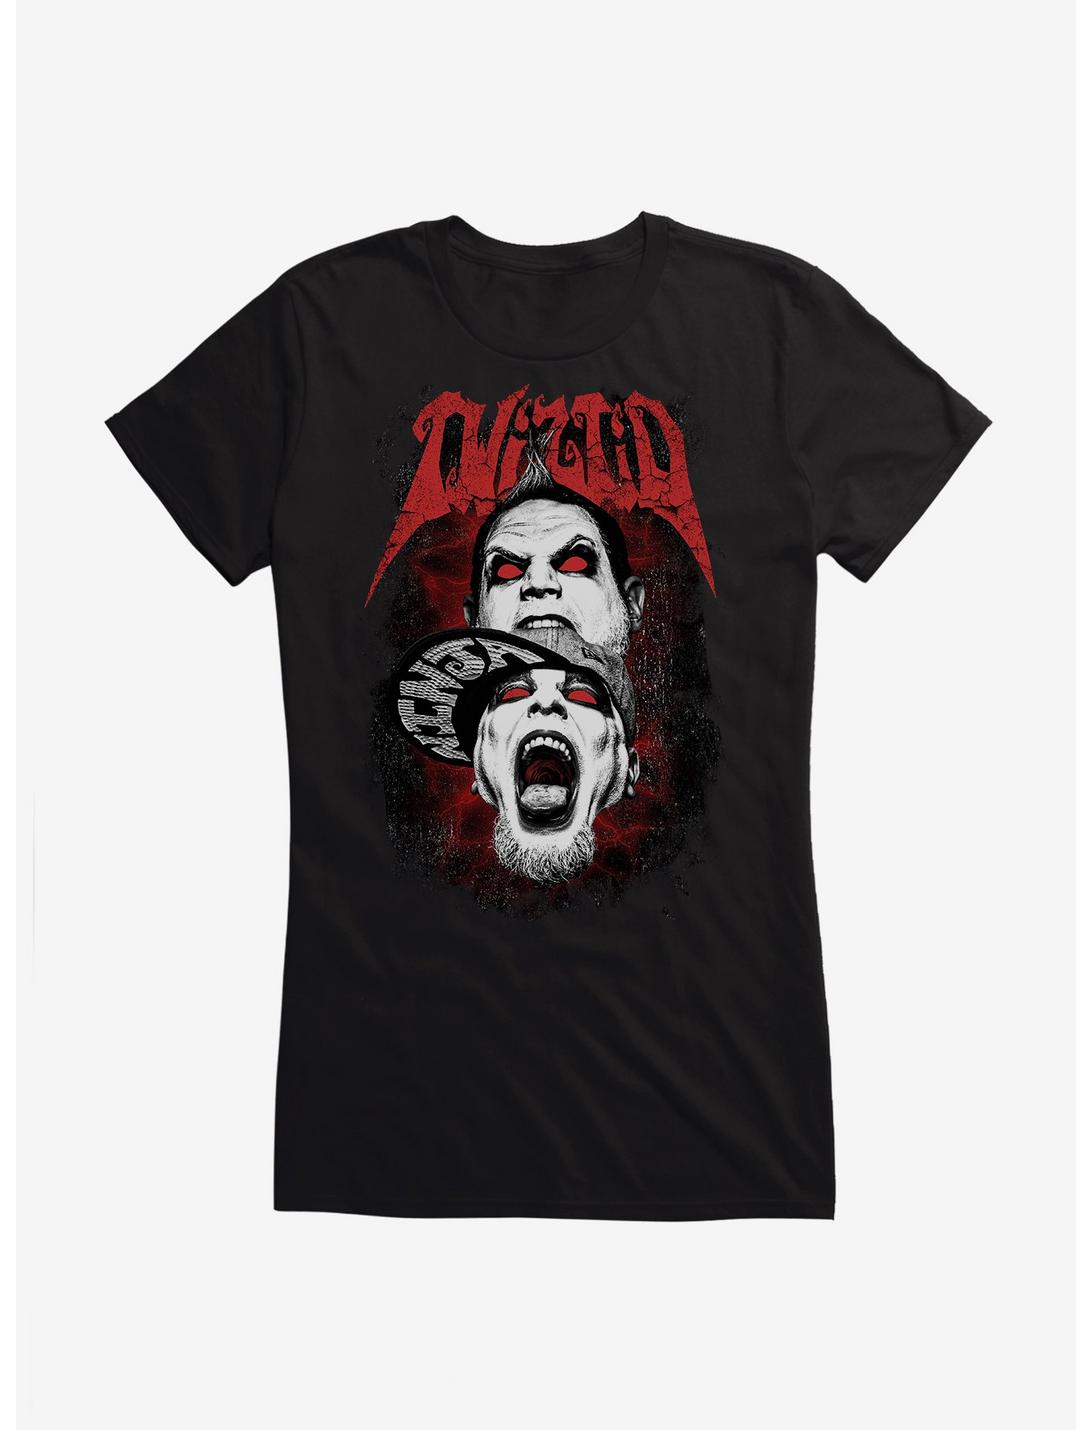 Twiztid Off With They Heads Girls T-Shirt, BLACK, hi-res